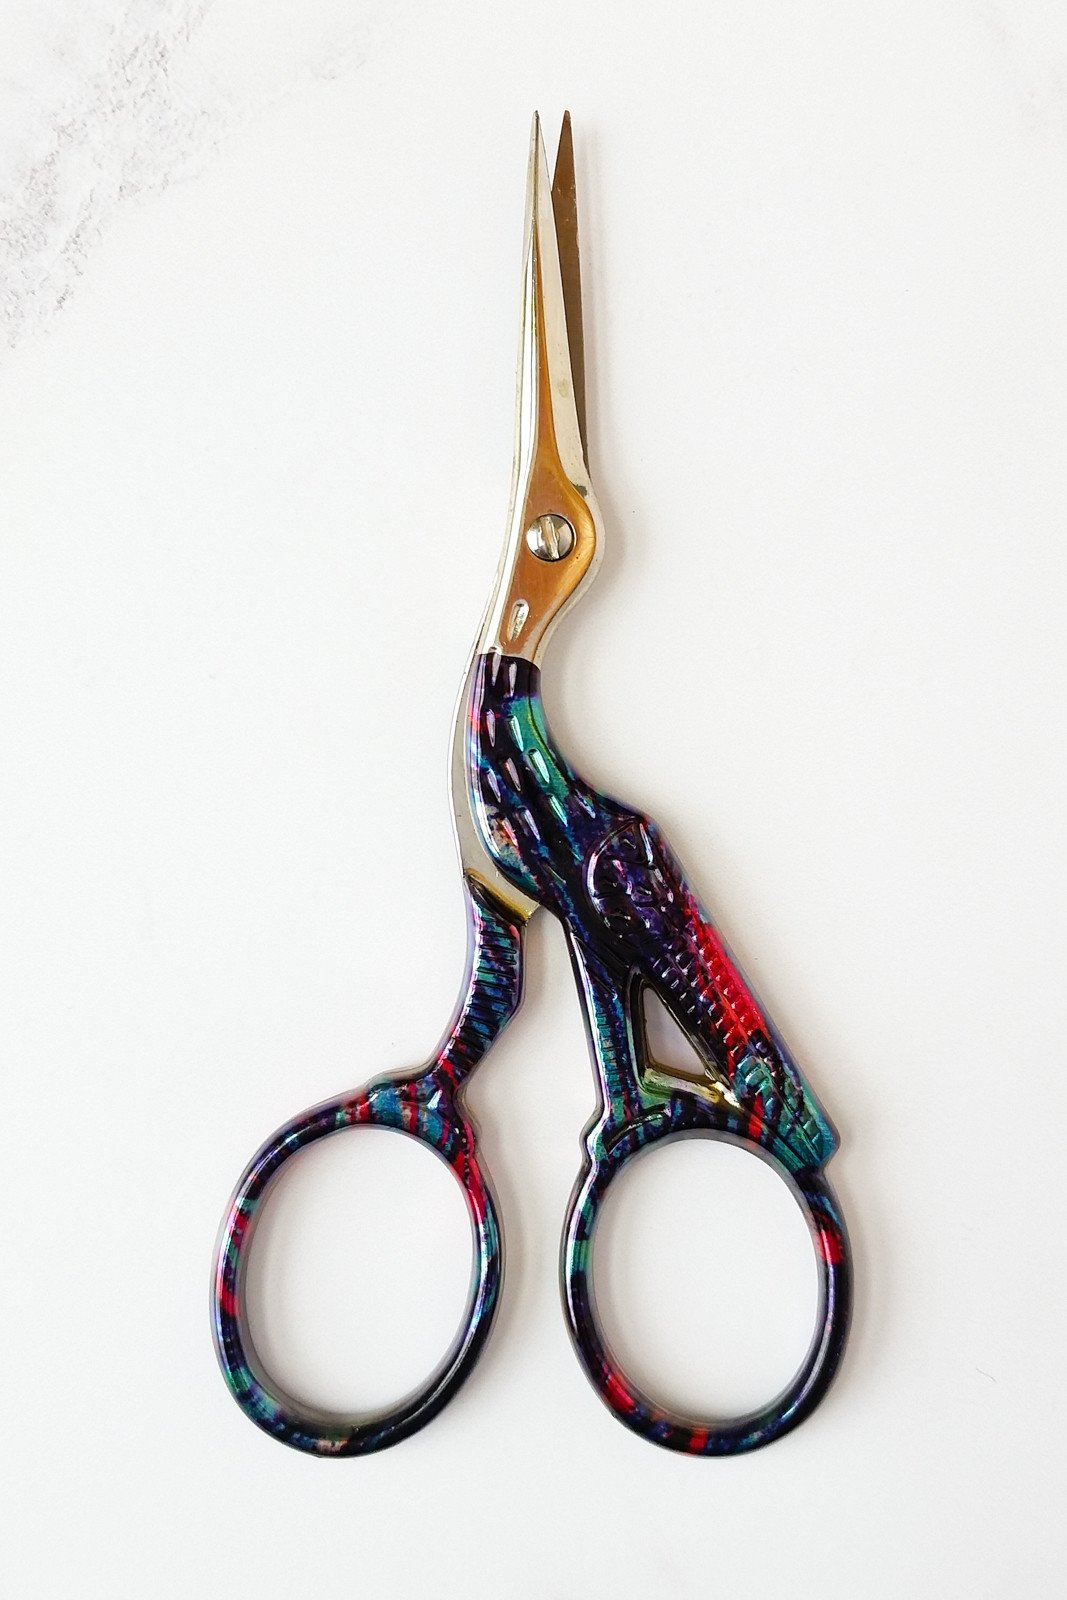 Vintage Stork Craft Scissors, Small Colourful Embroidery Scissors